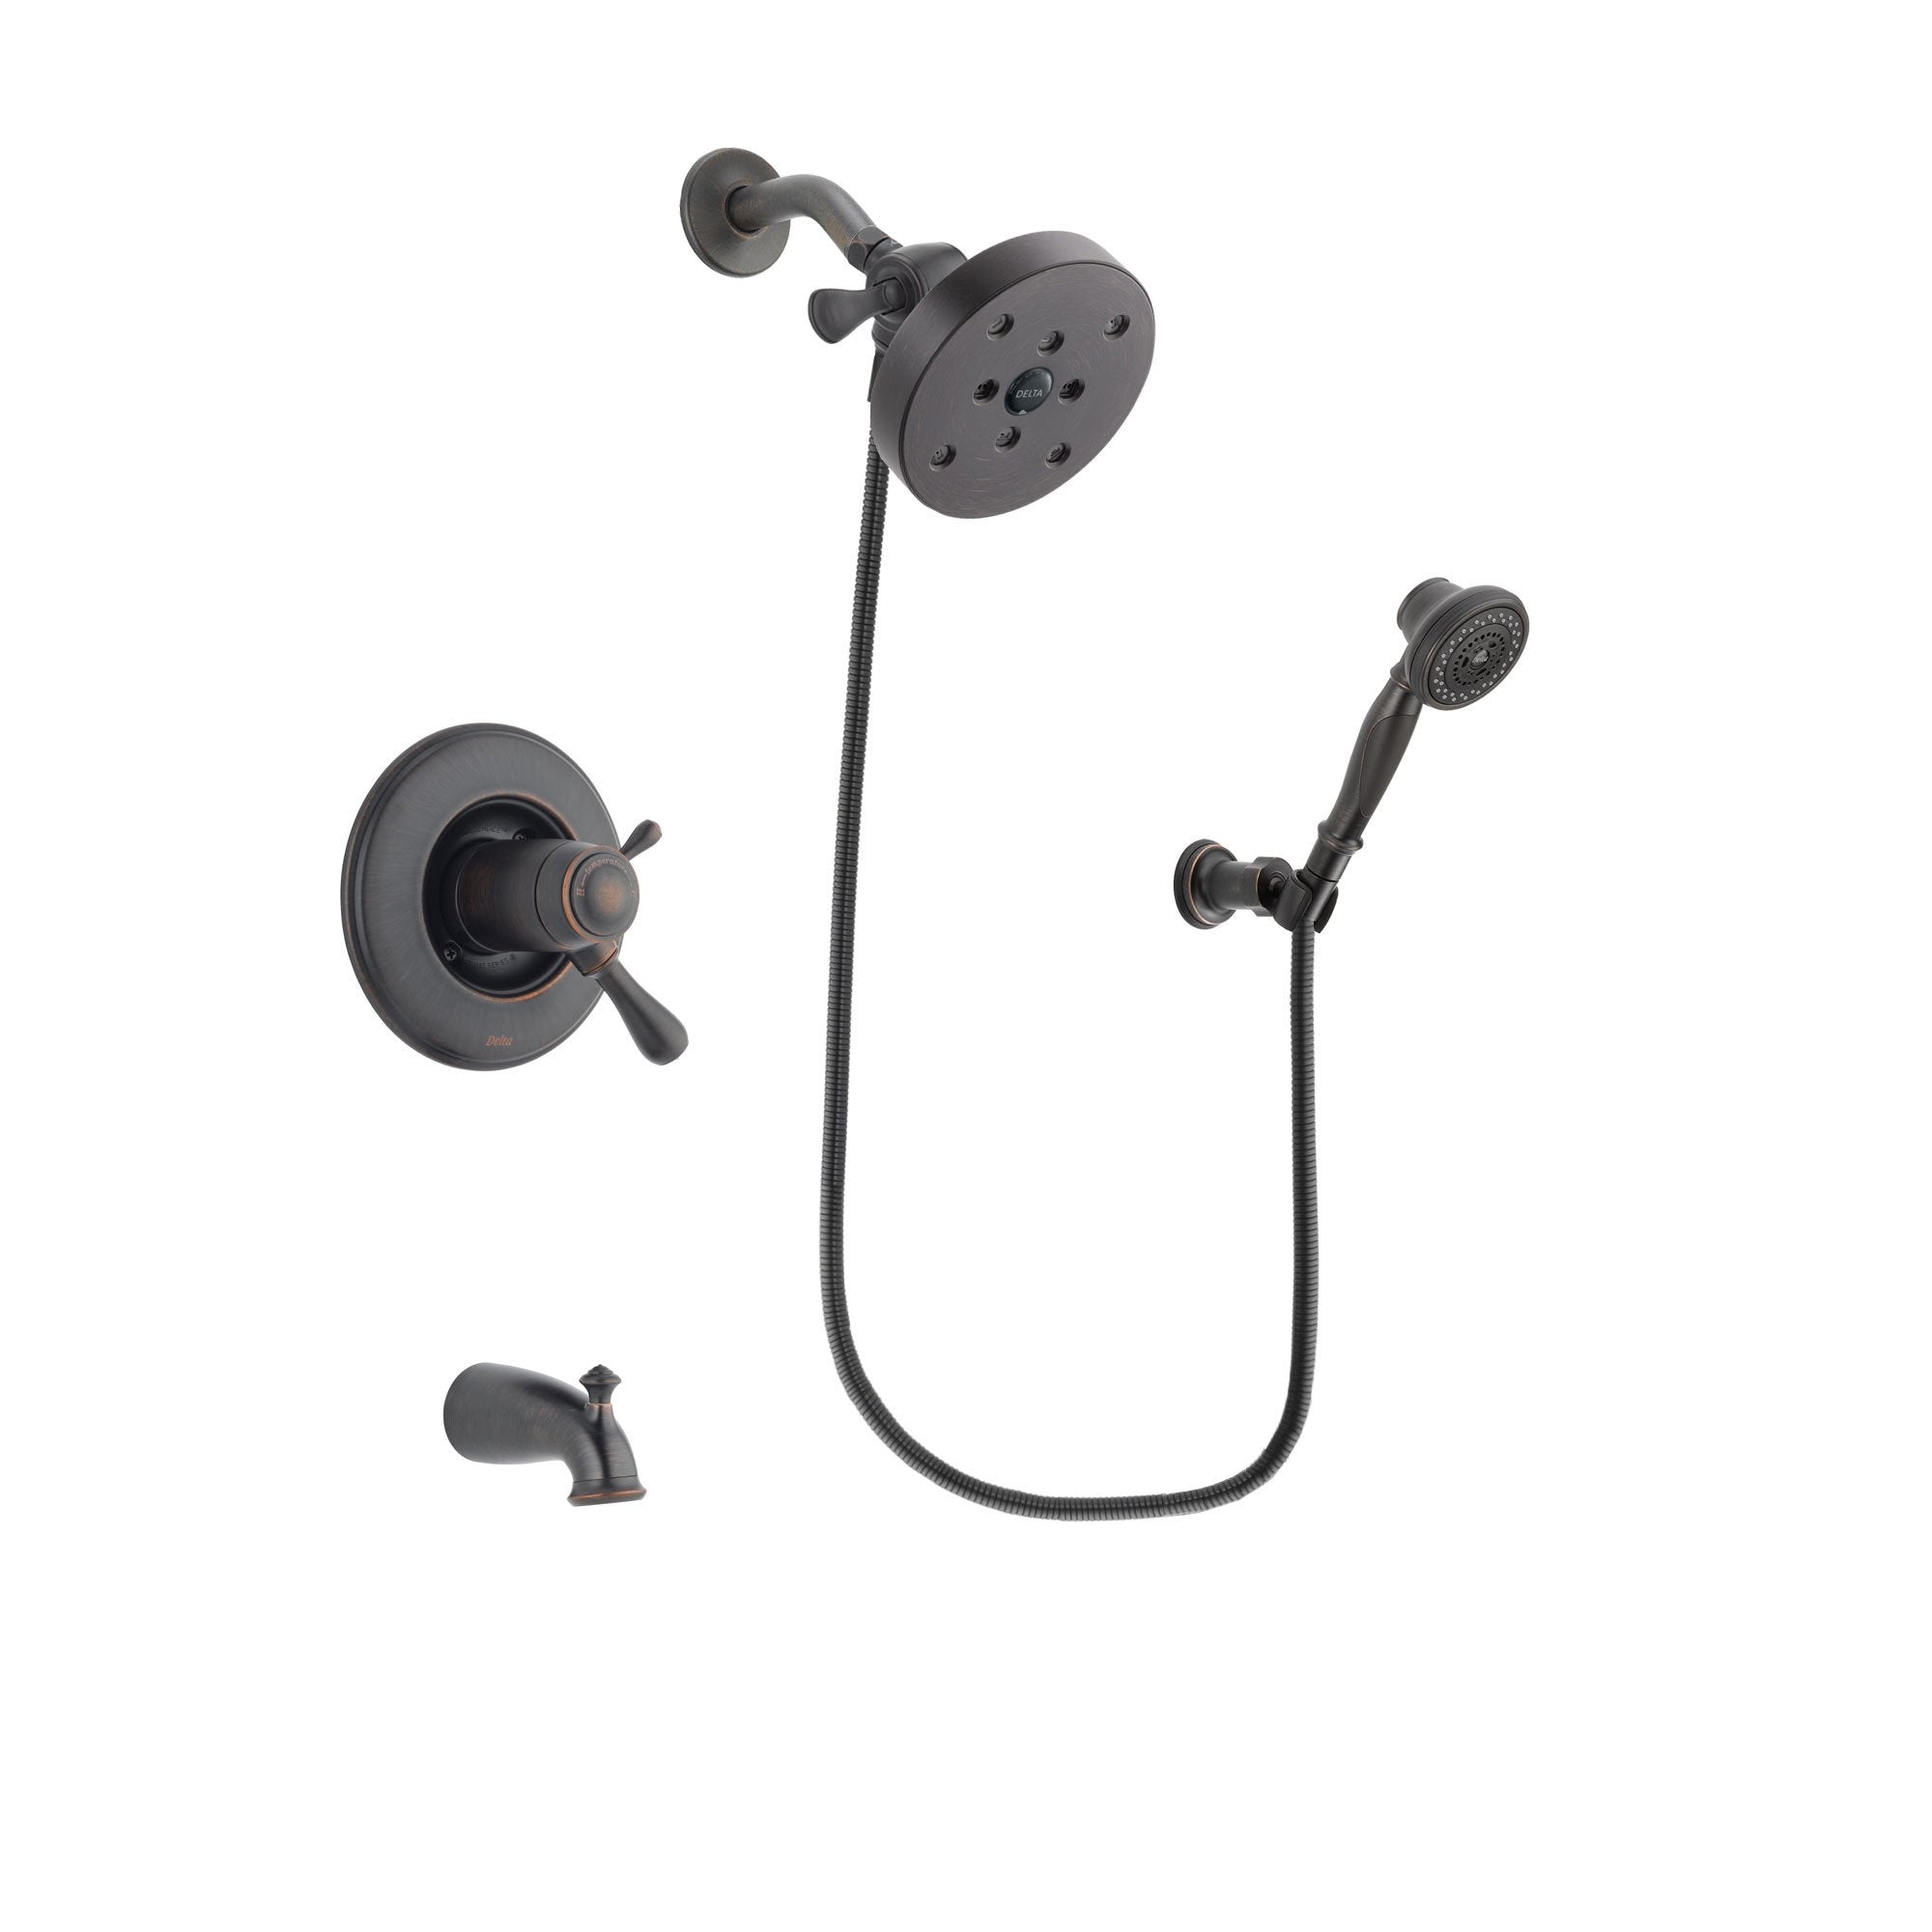 Delta Leland Venetian Bronze Finish Thermostatic Tub and Shower Faucet System Package with 5-1/2 inch Showerhead and 3-Spray Wall-Mount Hand Shower Includes Rough-in Valve and Tub Spout DSP3075V